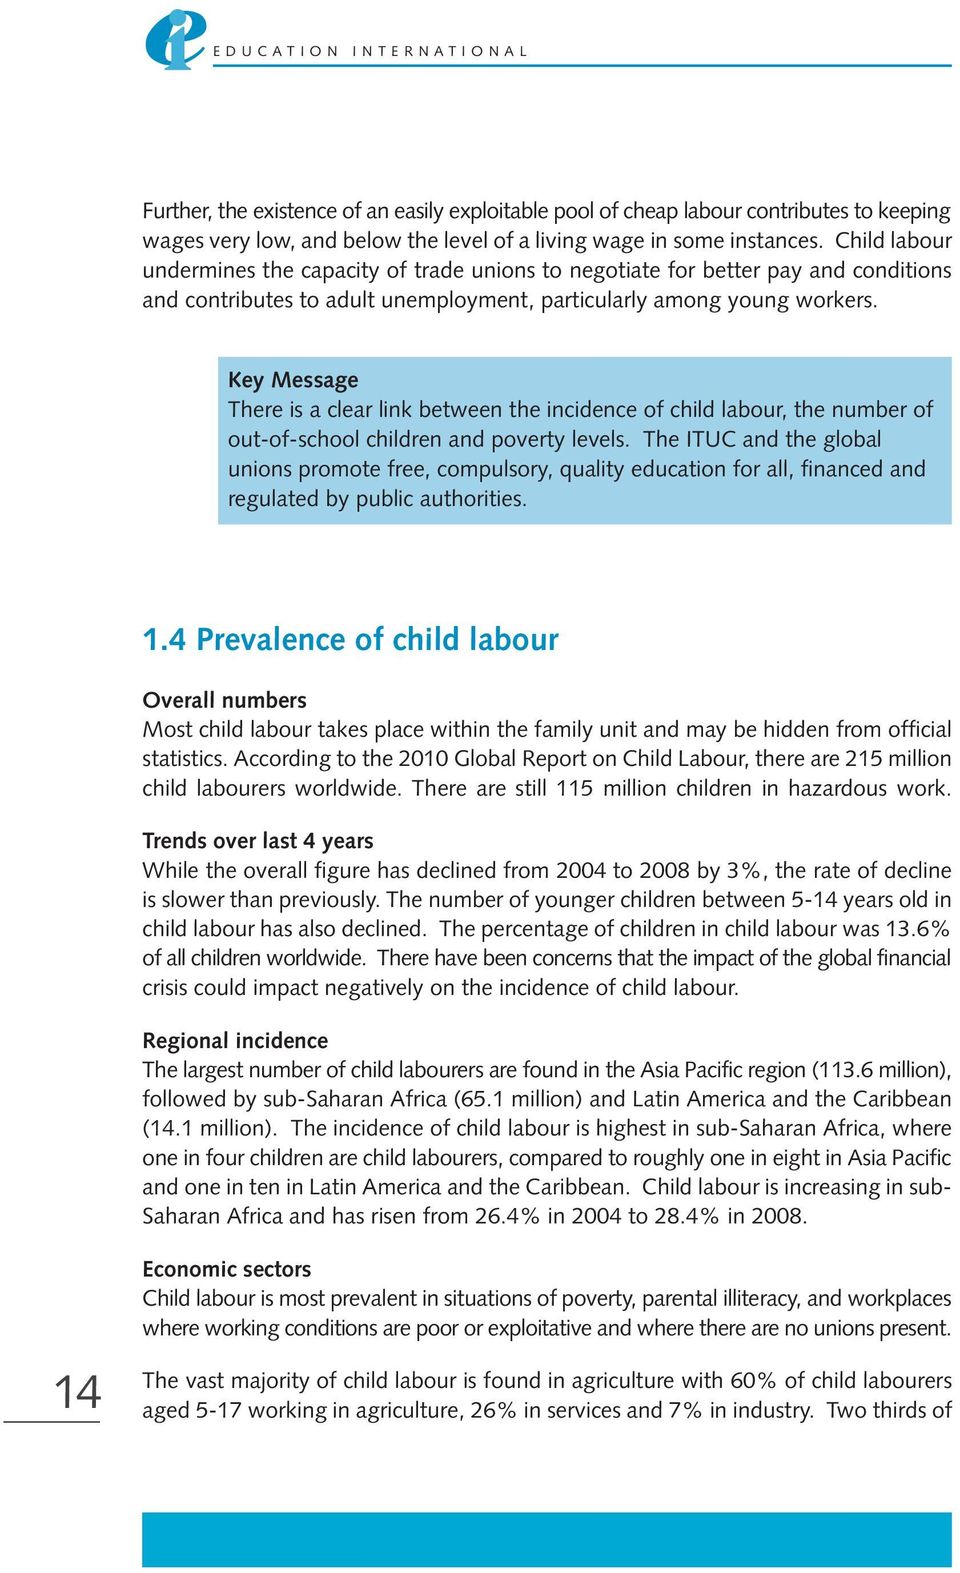 Key Message There is a clear link between the incidence of child labour, the number of out-of-school children and poverty levels.